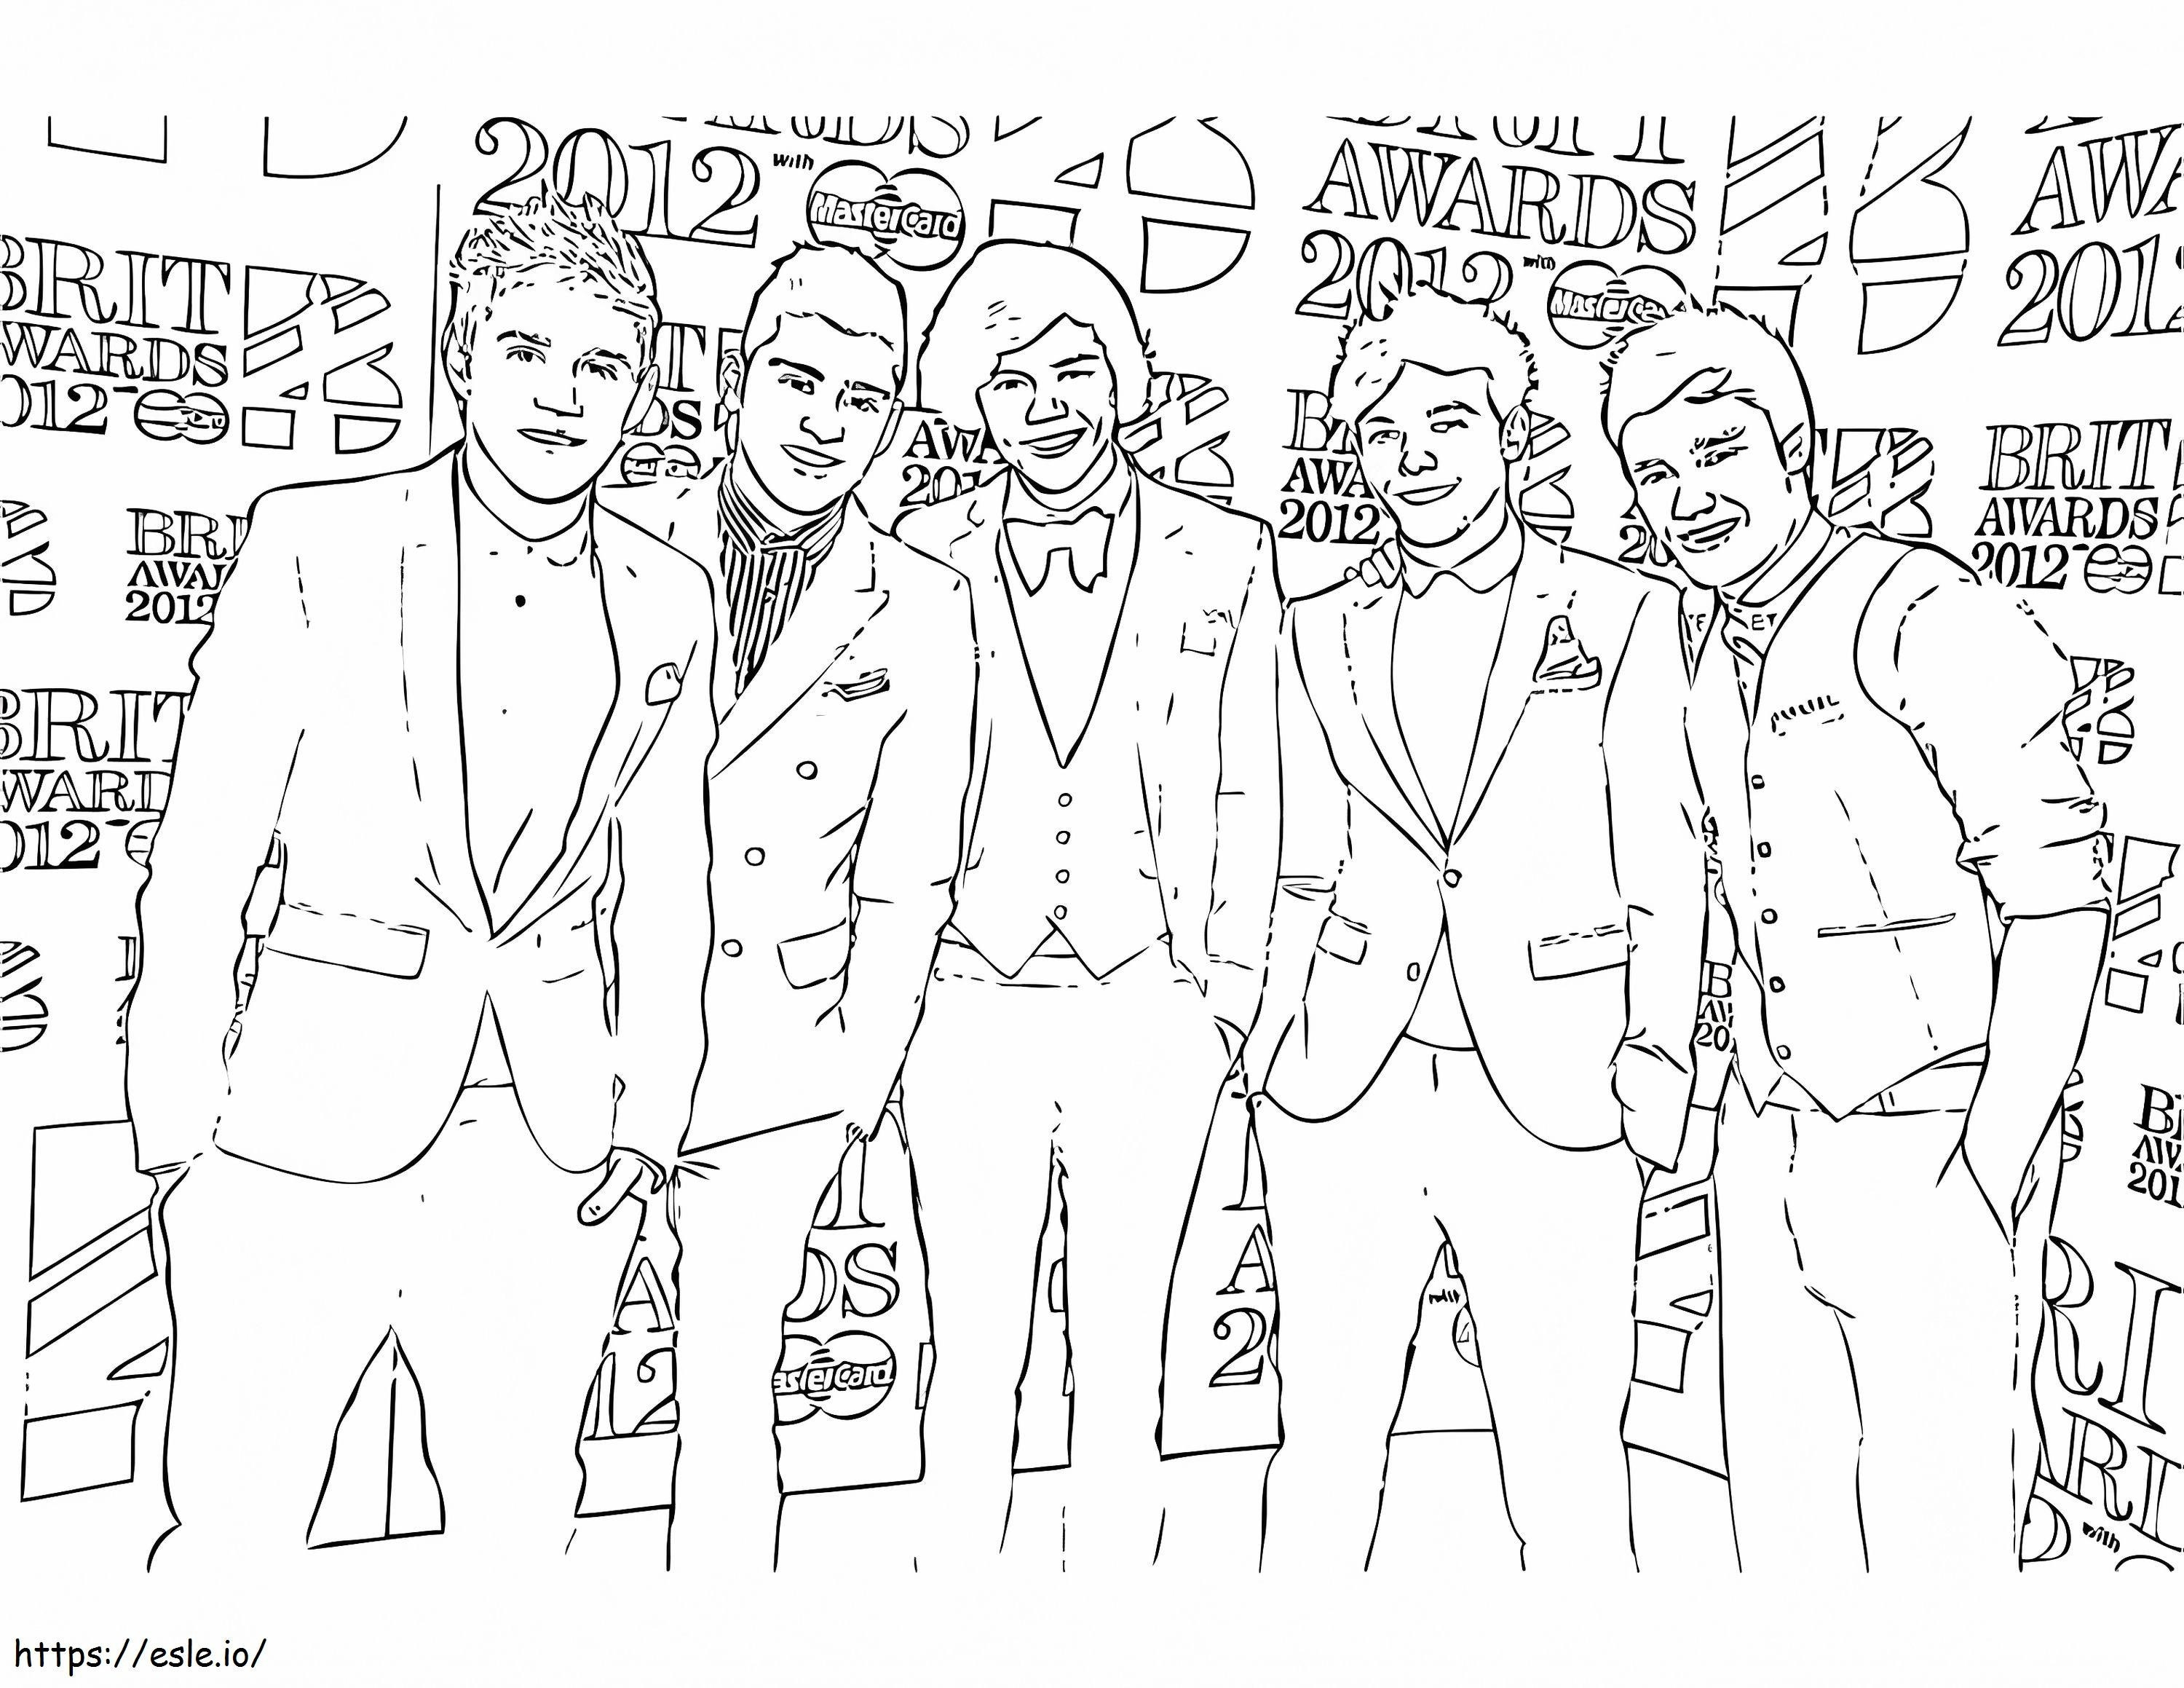 Cool One Direction coloring page